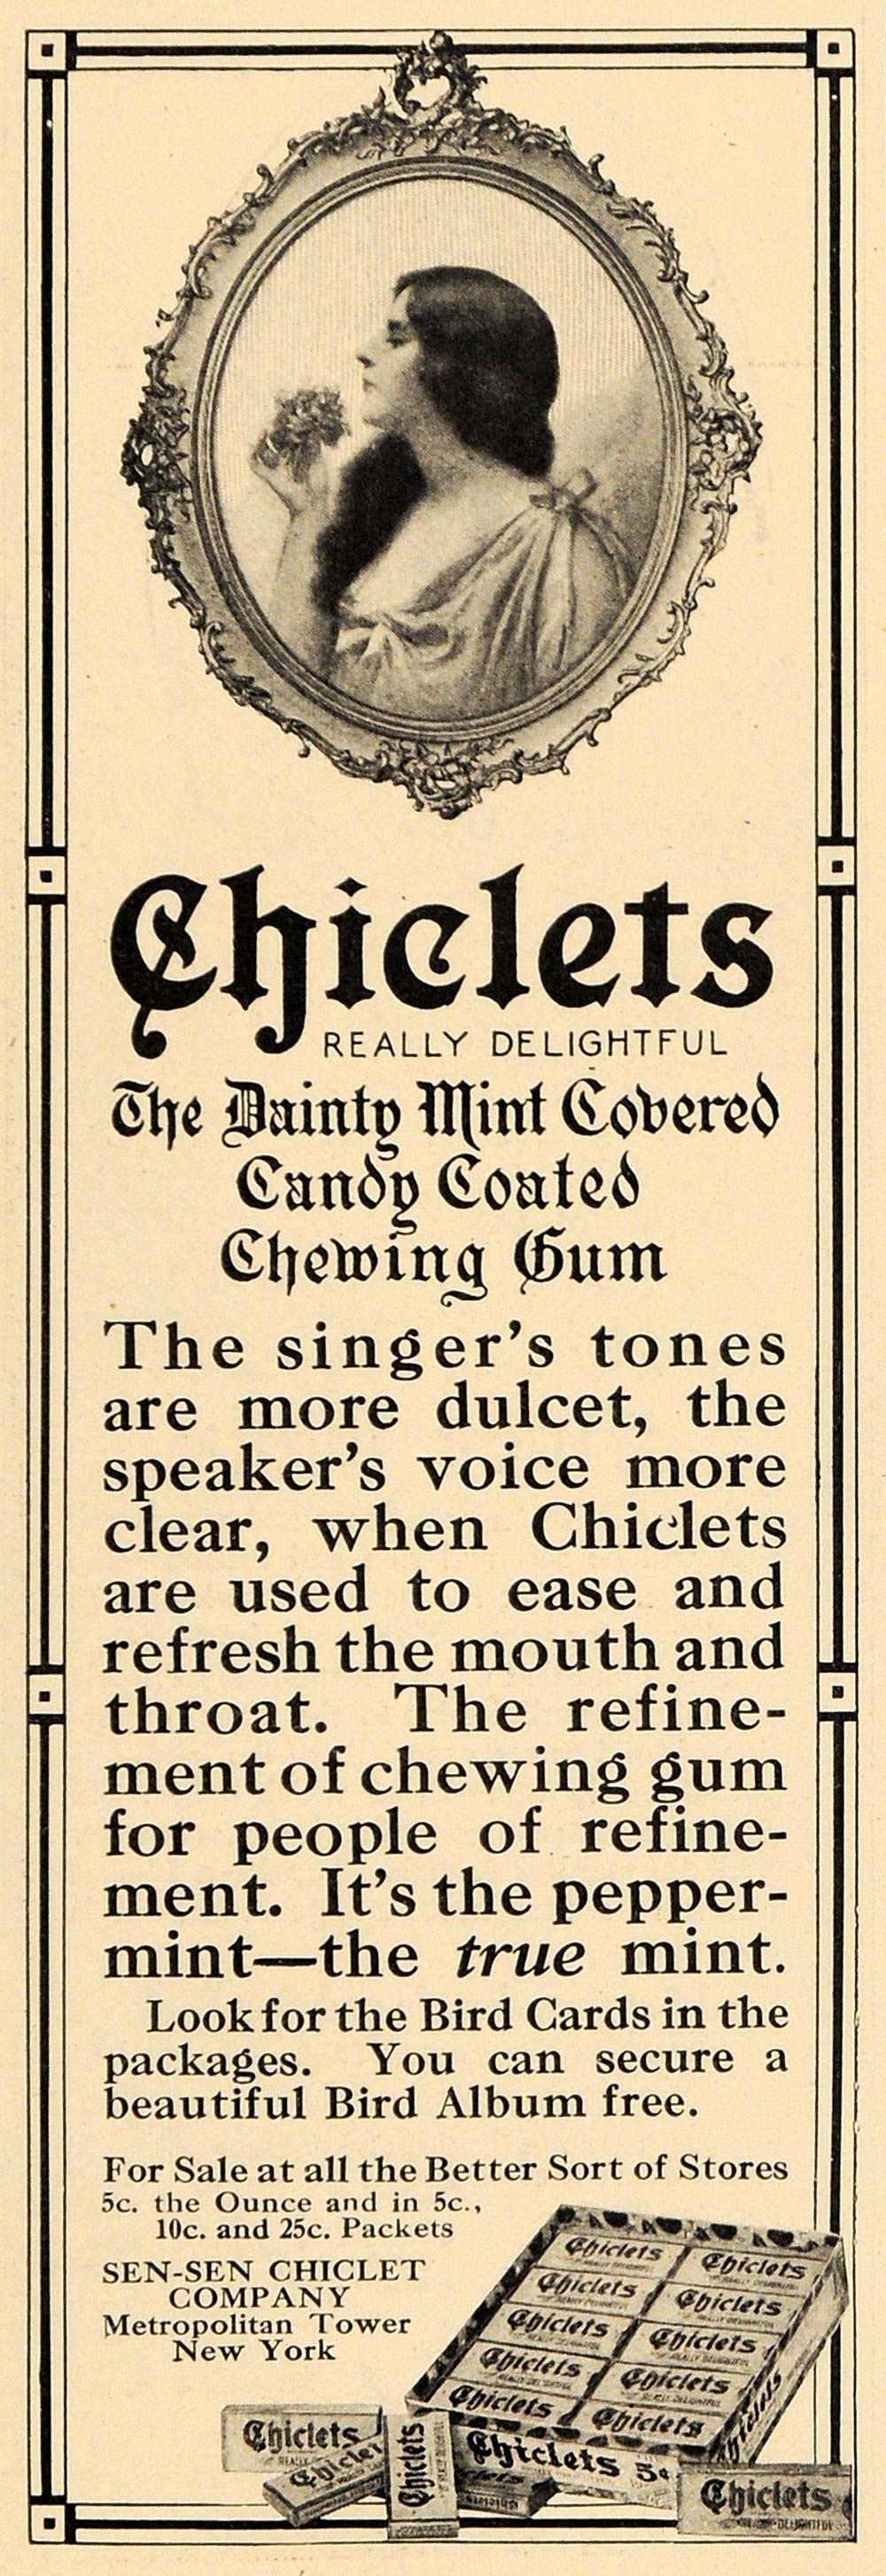 1912 Ad Sen-Sen Chiclets Mint Candy Coated Chewing Gums - ORIGINAL GH2